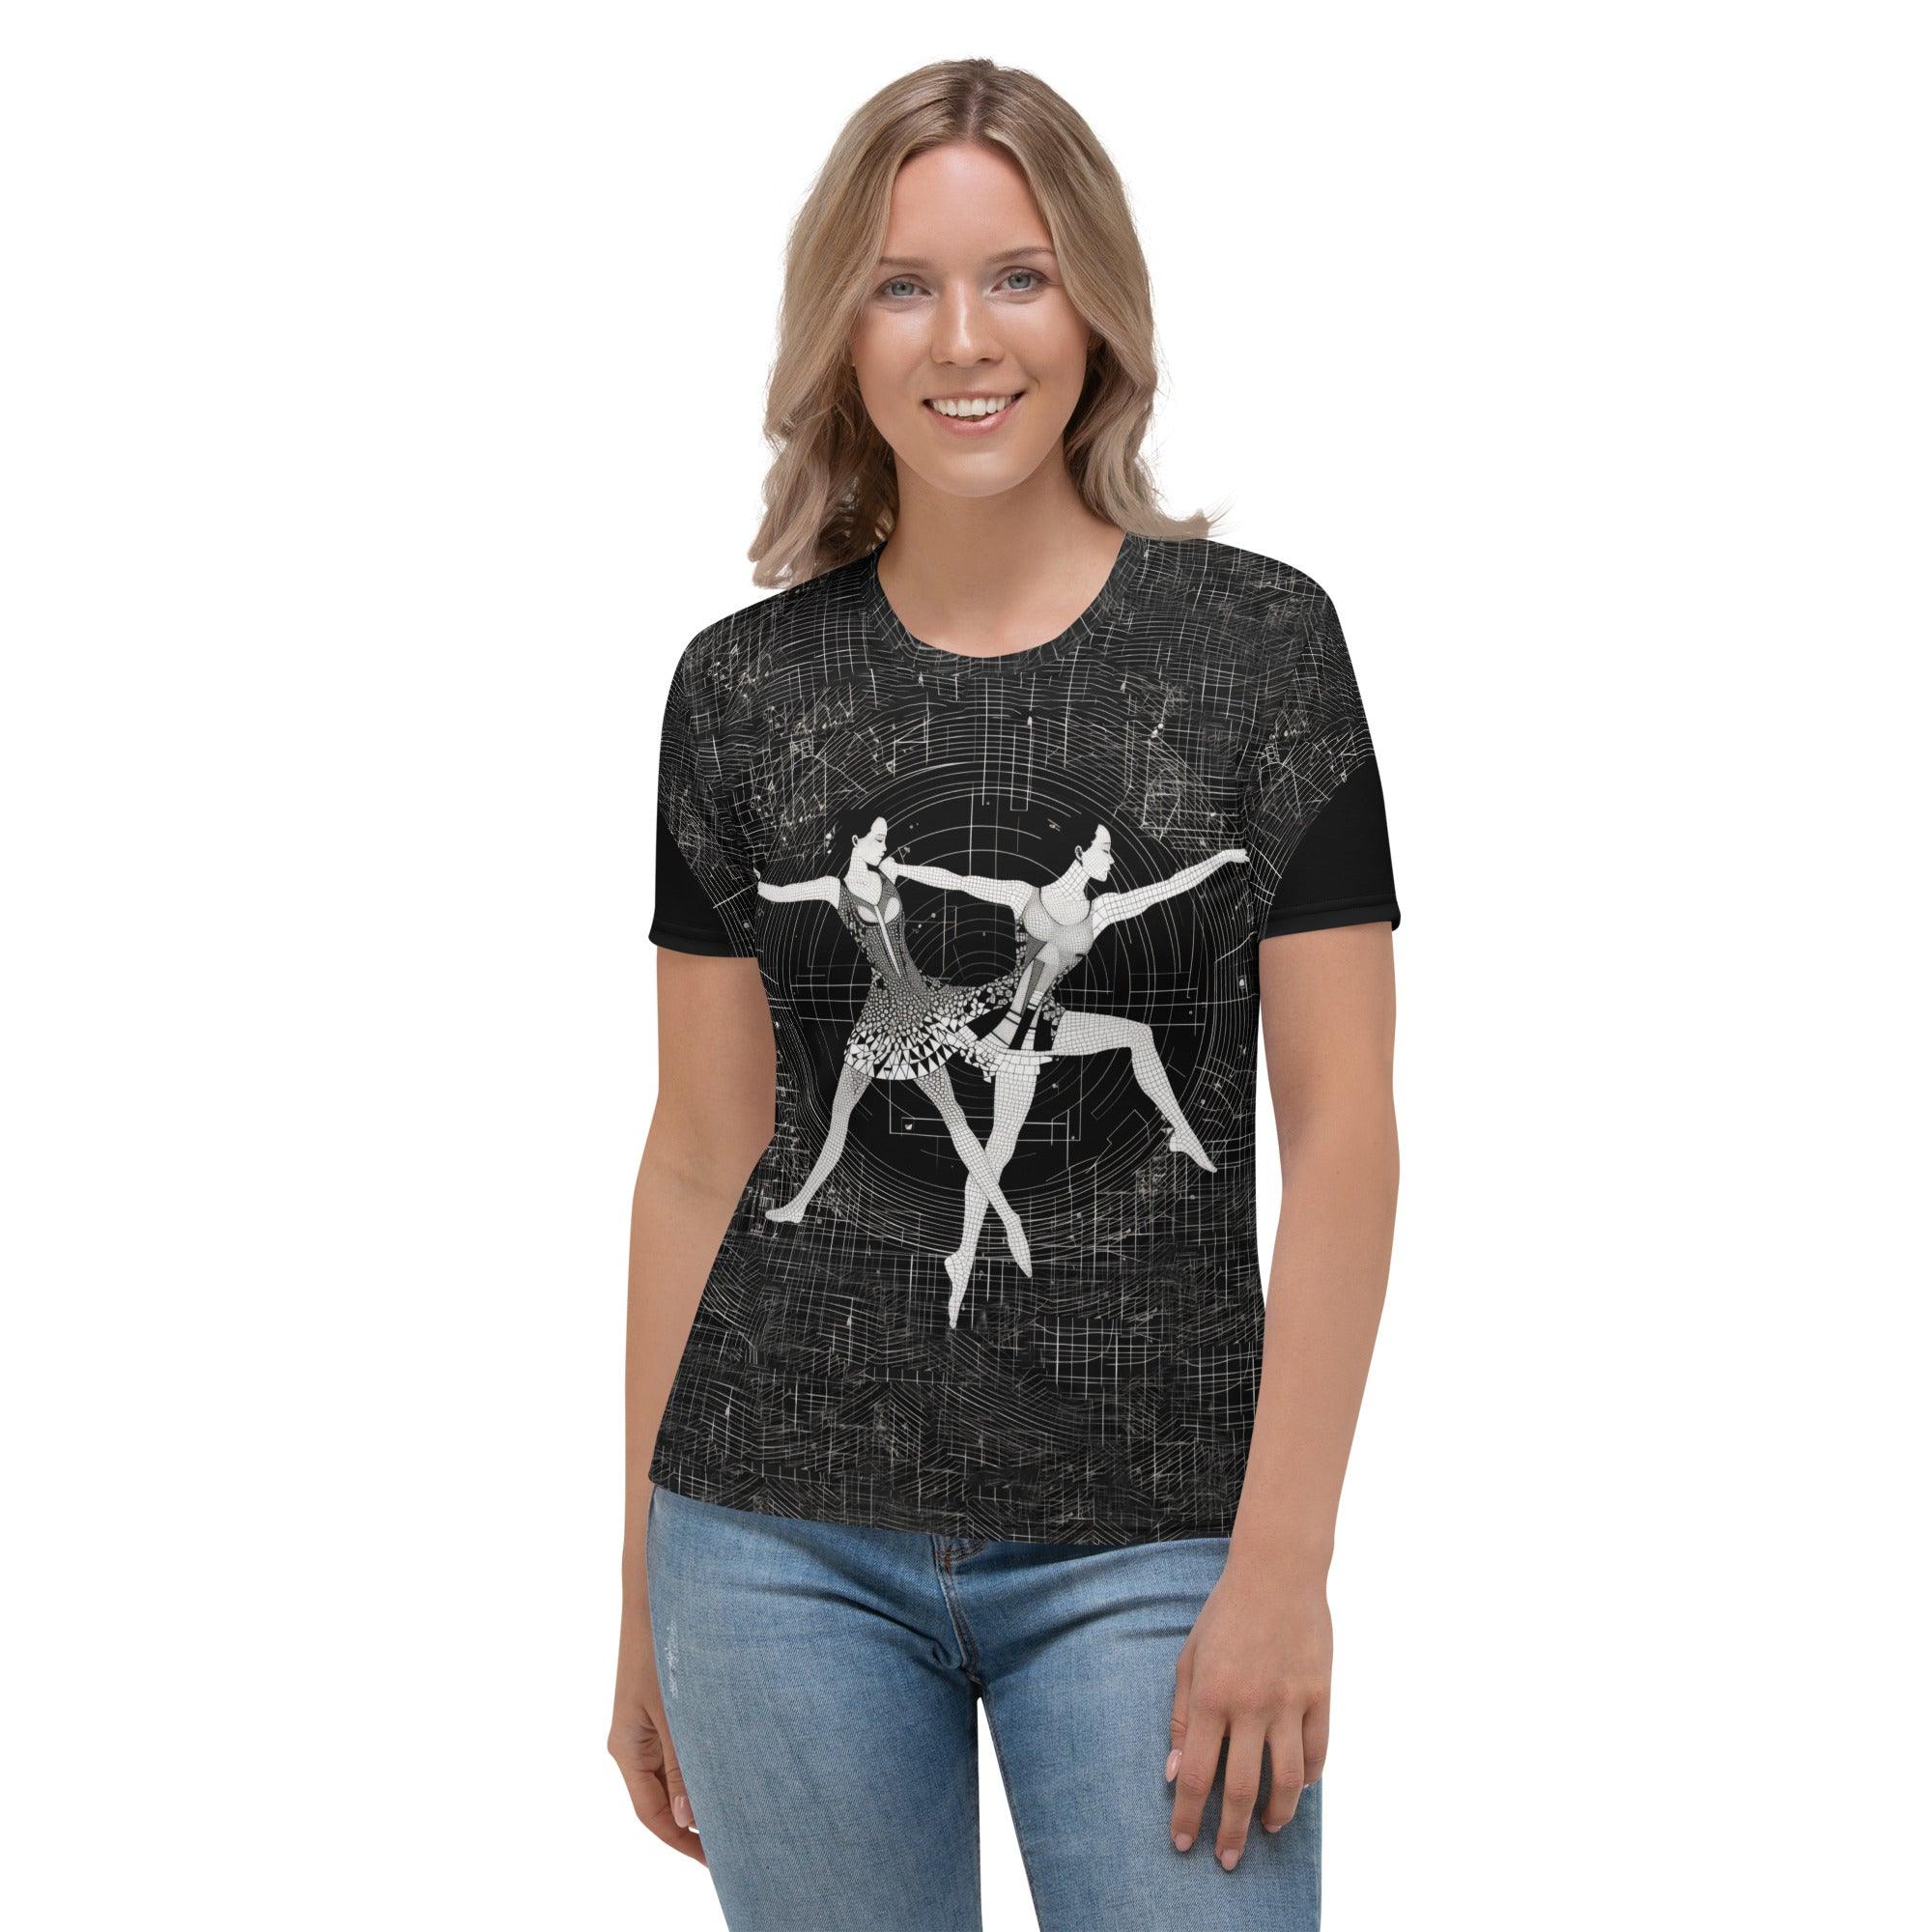 Stylish Aerial Dance themed Women's T-shirt front view.